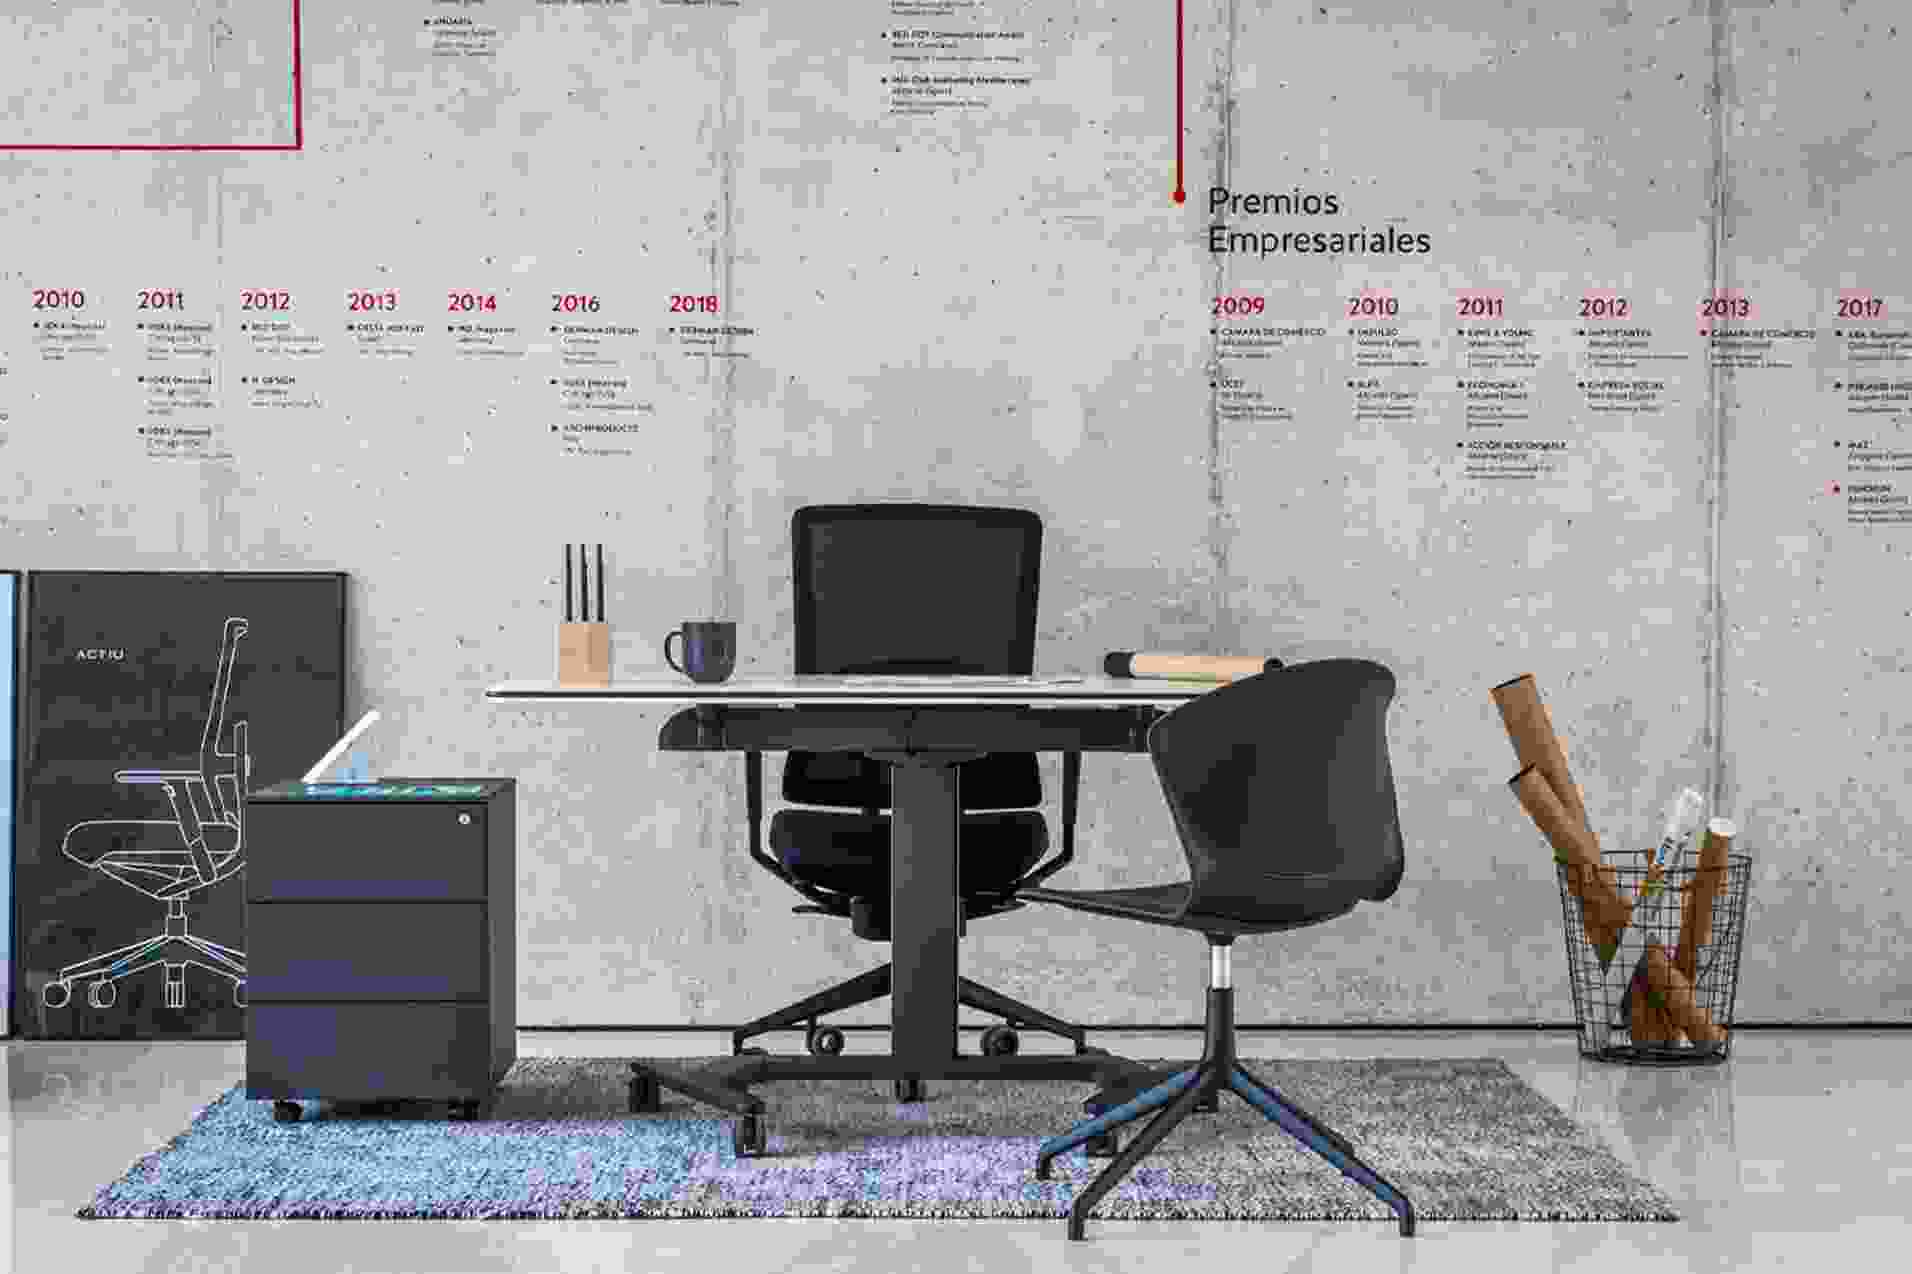 A trendy Home Office: Nordic efficiency and industrial productivity